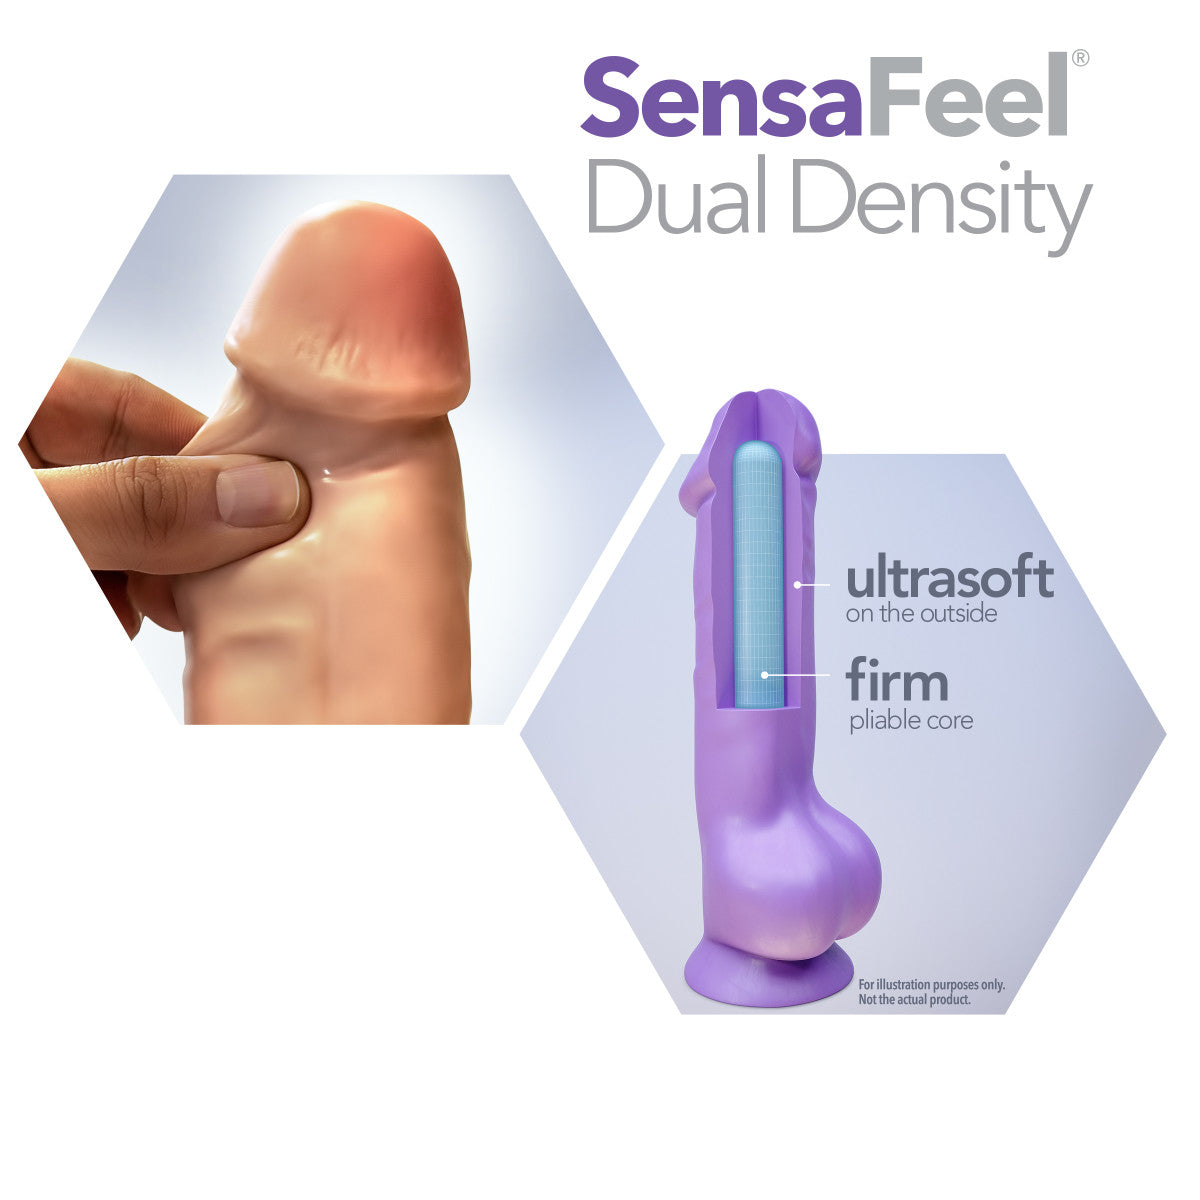 vanilla skin tone vibrating dildo features a rounded head and smooth shaft. Shaft is thick, long, and straight. Suction cup bottom also serves as twist dial to adjust intensity.  Additional images show alternate angles.